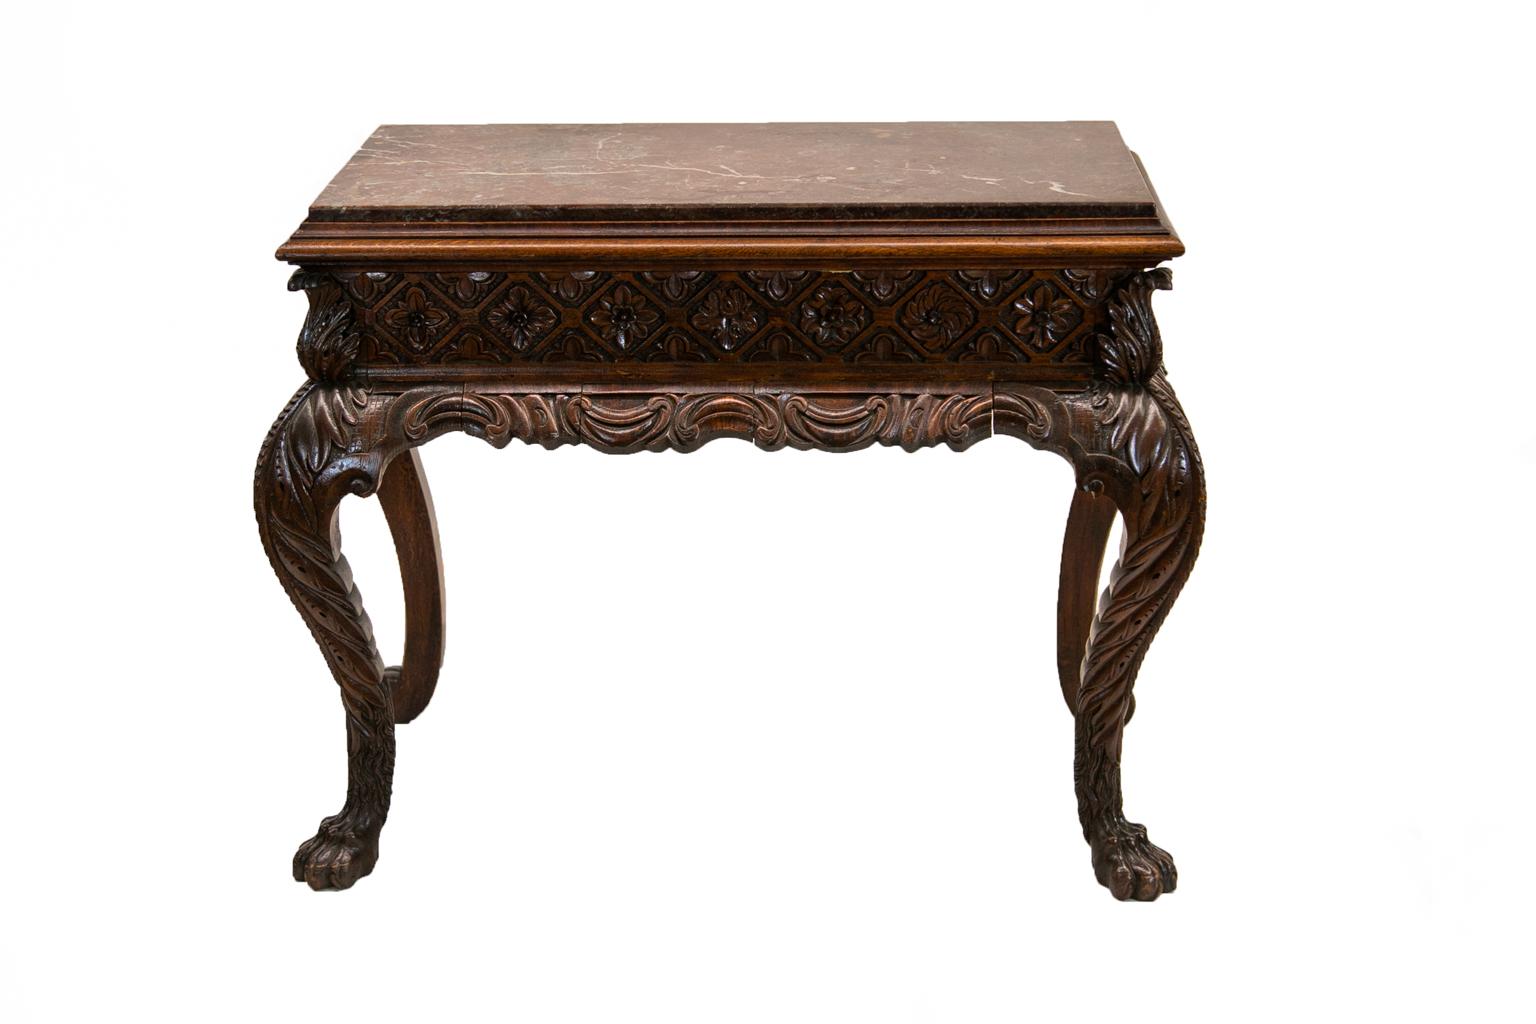 The marble-top of this carved marble-top console table is framed with heavy double molding. The top is removable. The frieze is carved with repeating diamond and circle patterns enclosing floral carvings in high relief. The corners have carved